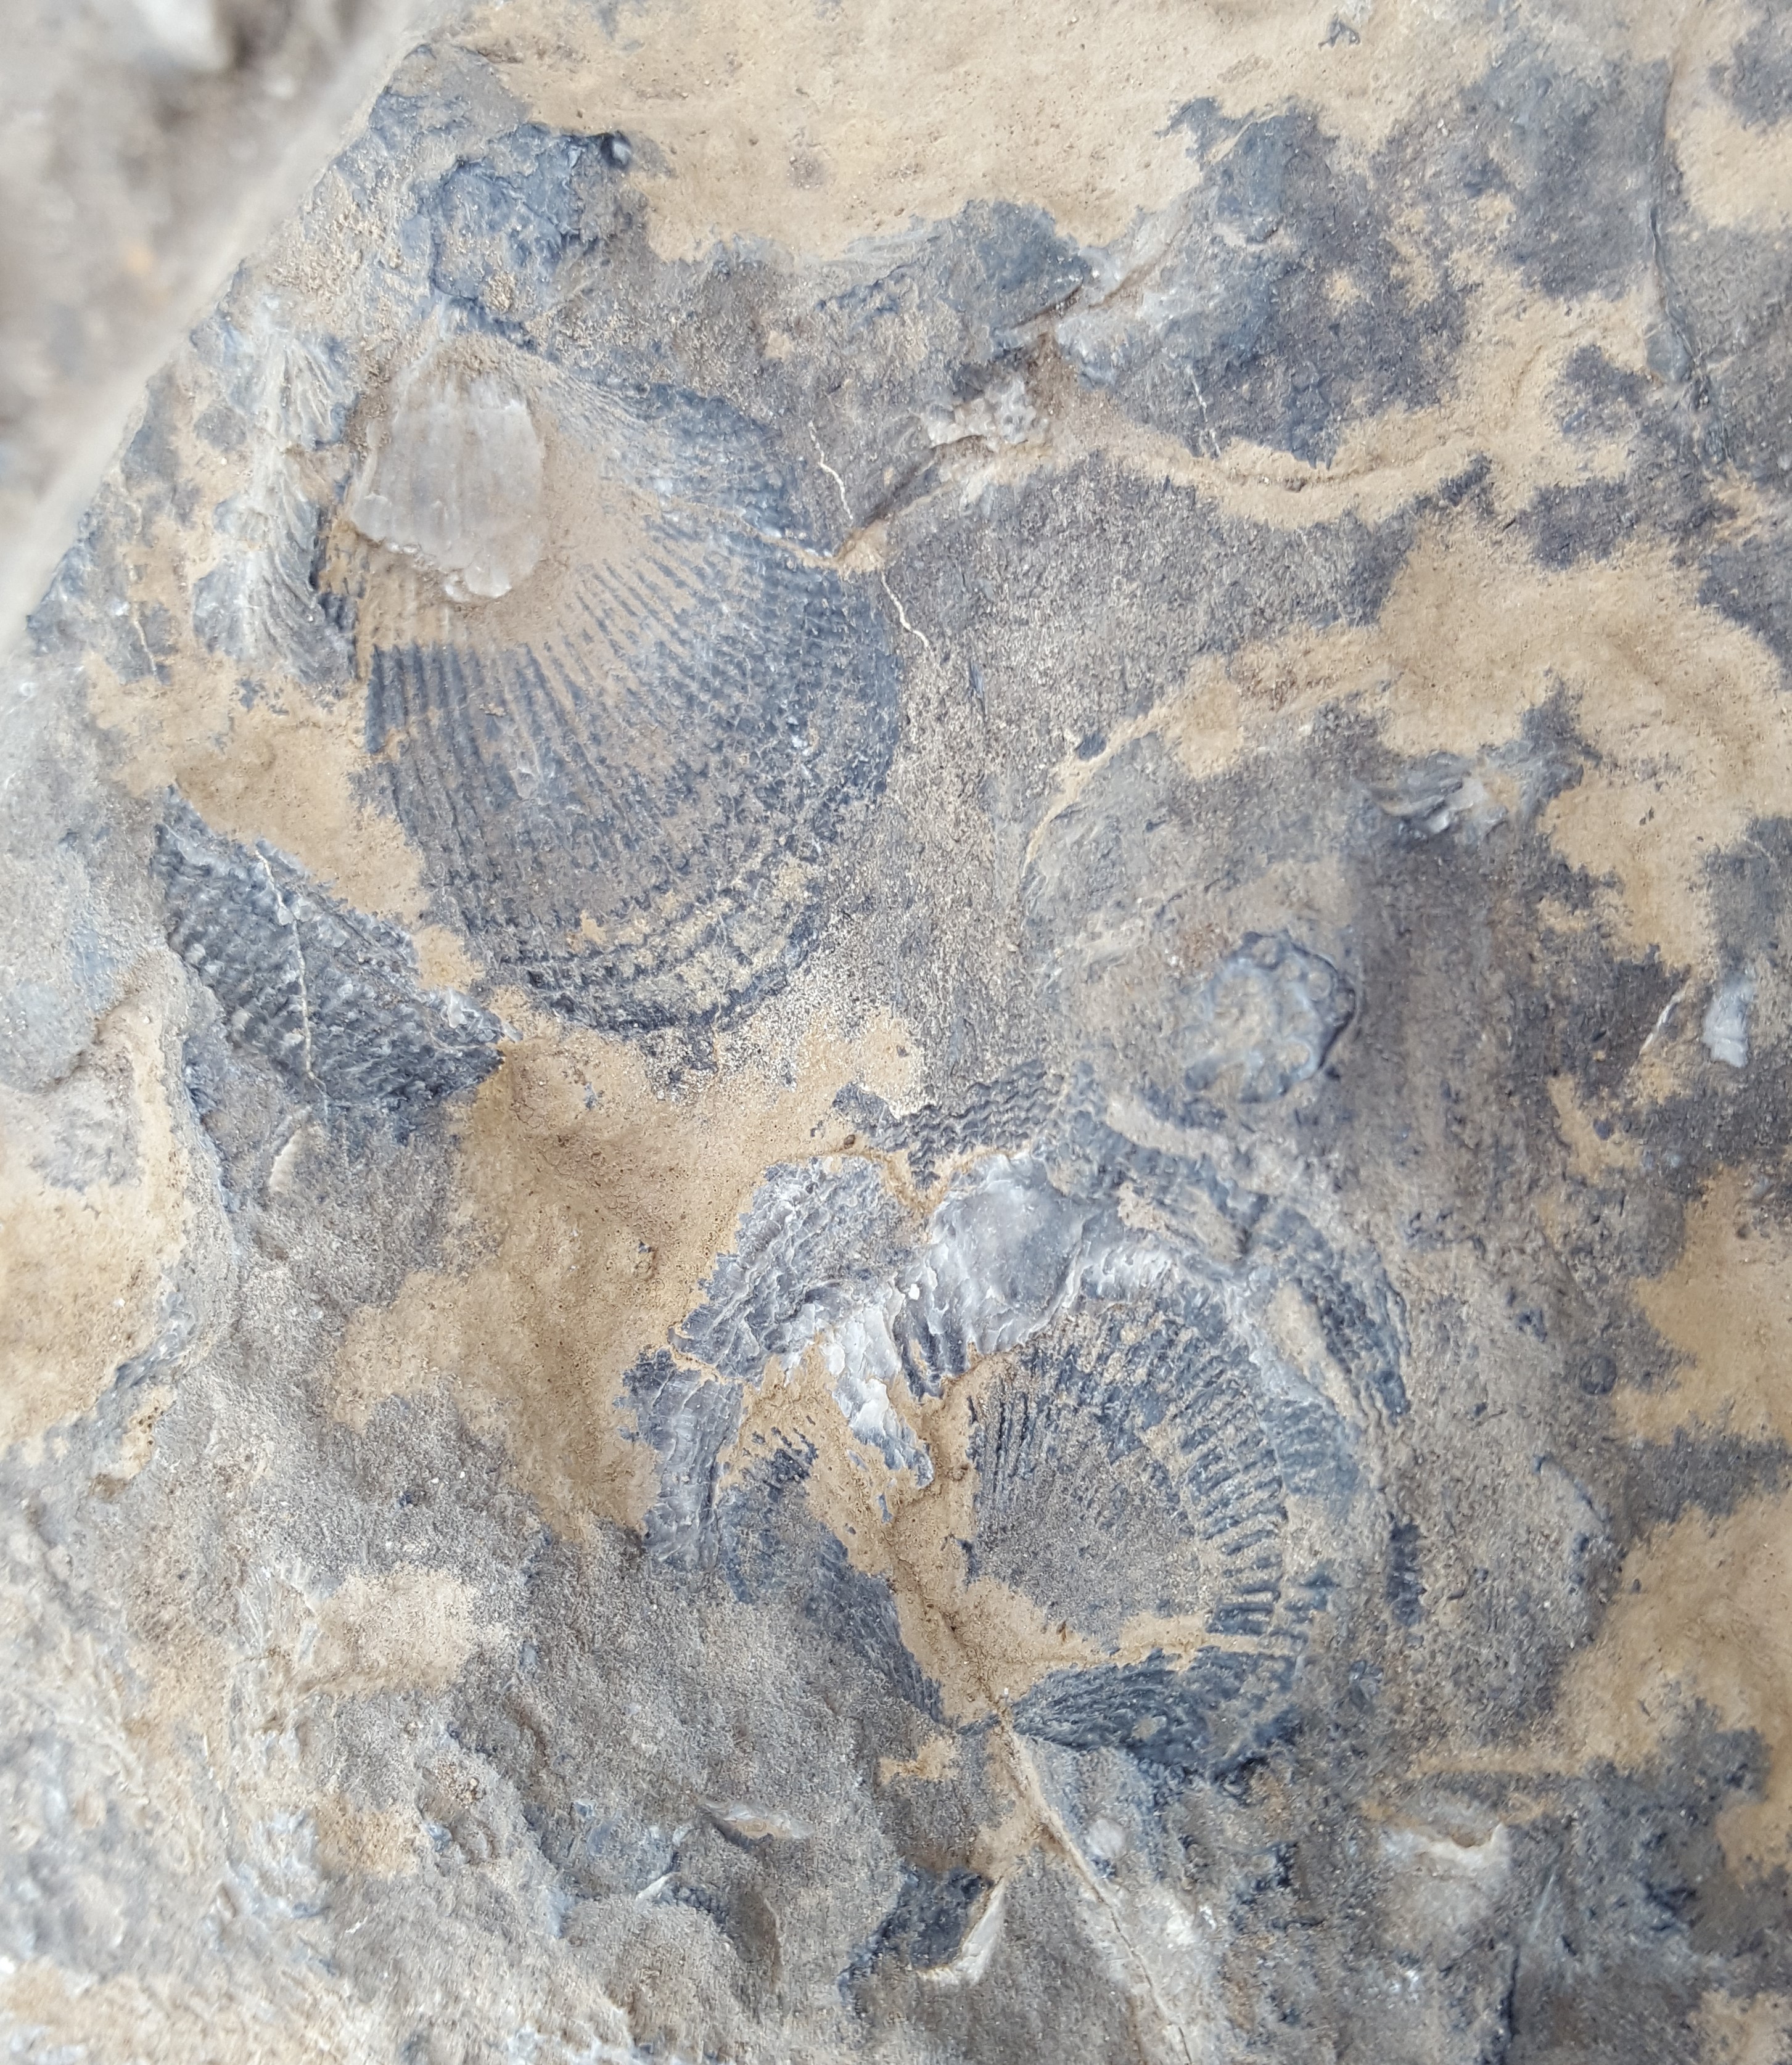 rock exposure with a few small impressions of atrypide brachiopods about 2 - 3 cm across.